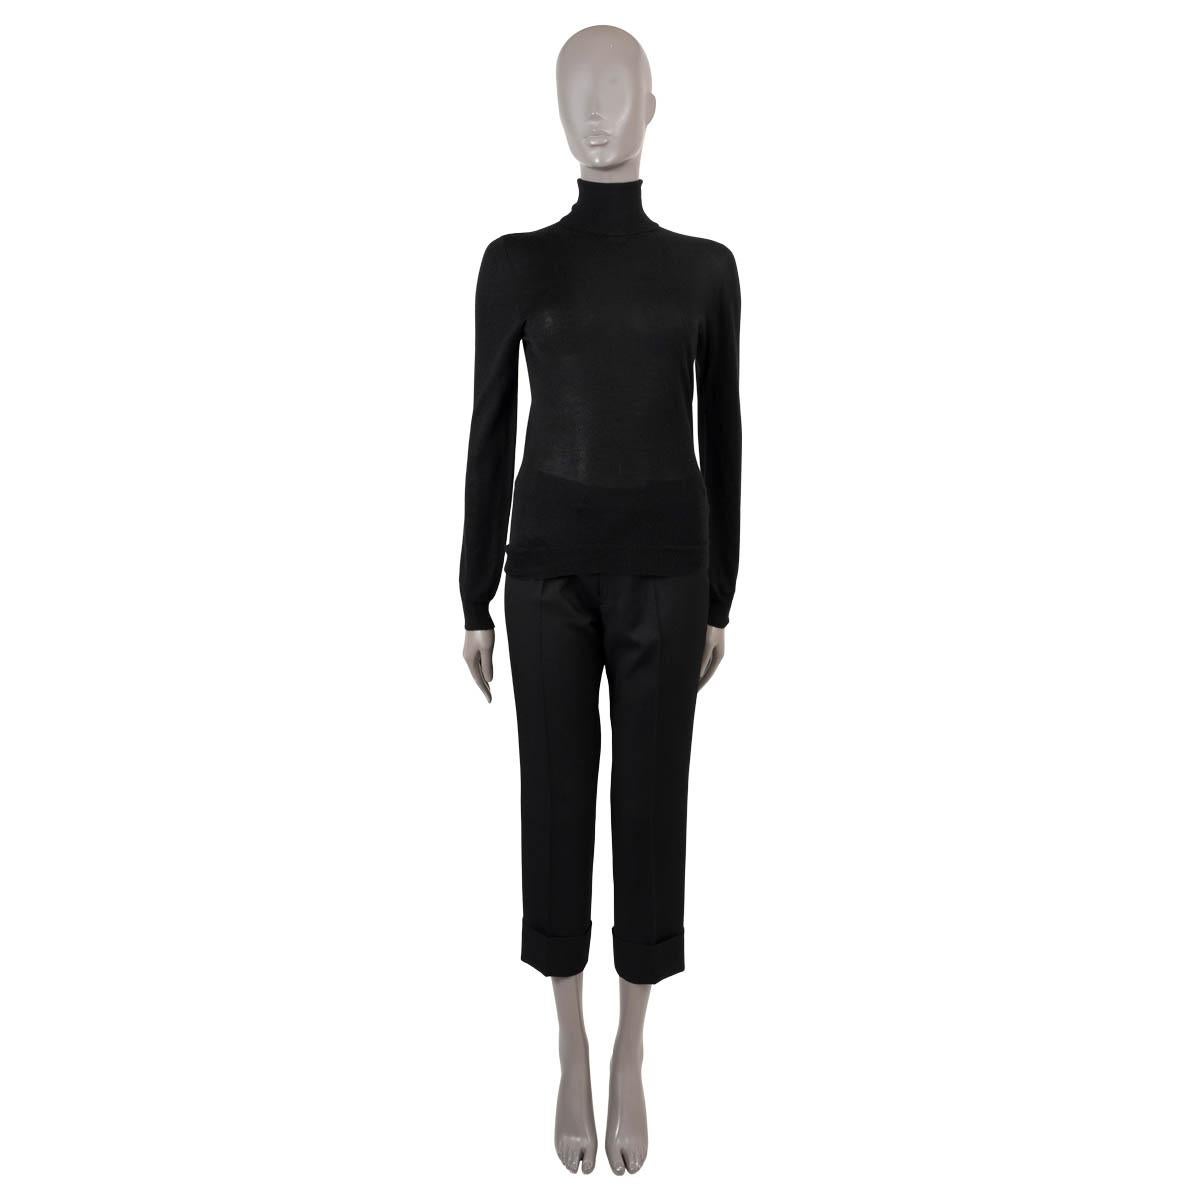 100% authentic Bottega Veneta turtleneck sweater in black cashmere (70%) and silk (30%). Features rib-knit cuffs and hem. Has been worn and is in excellent condition.

Measurements
Tag Size	40
Size	S
Shoulder Width	35cm (13.7in)
Bust From	88cm